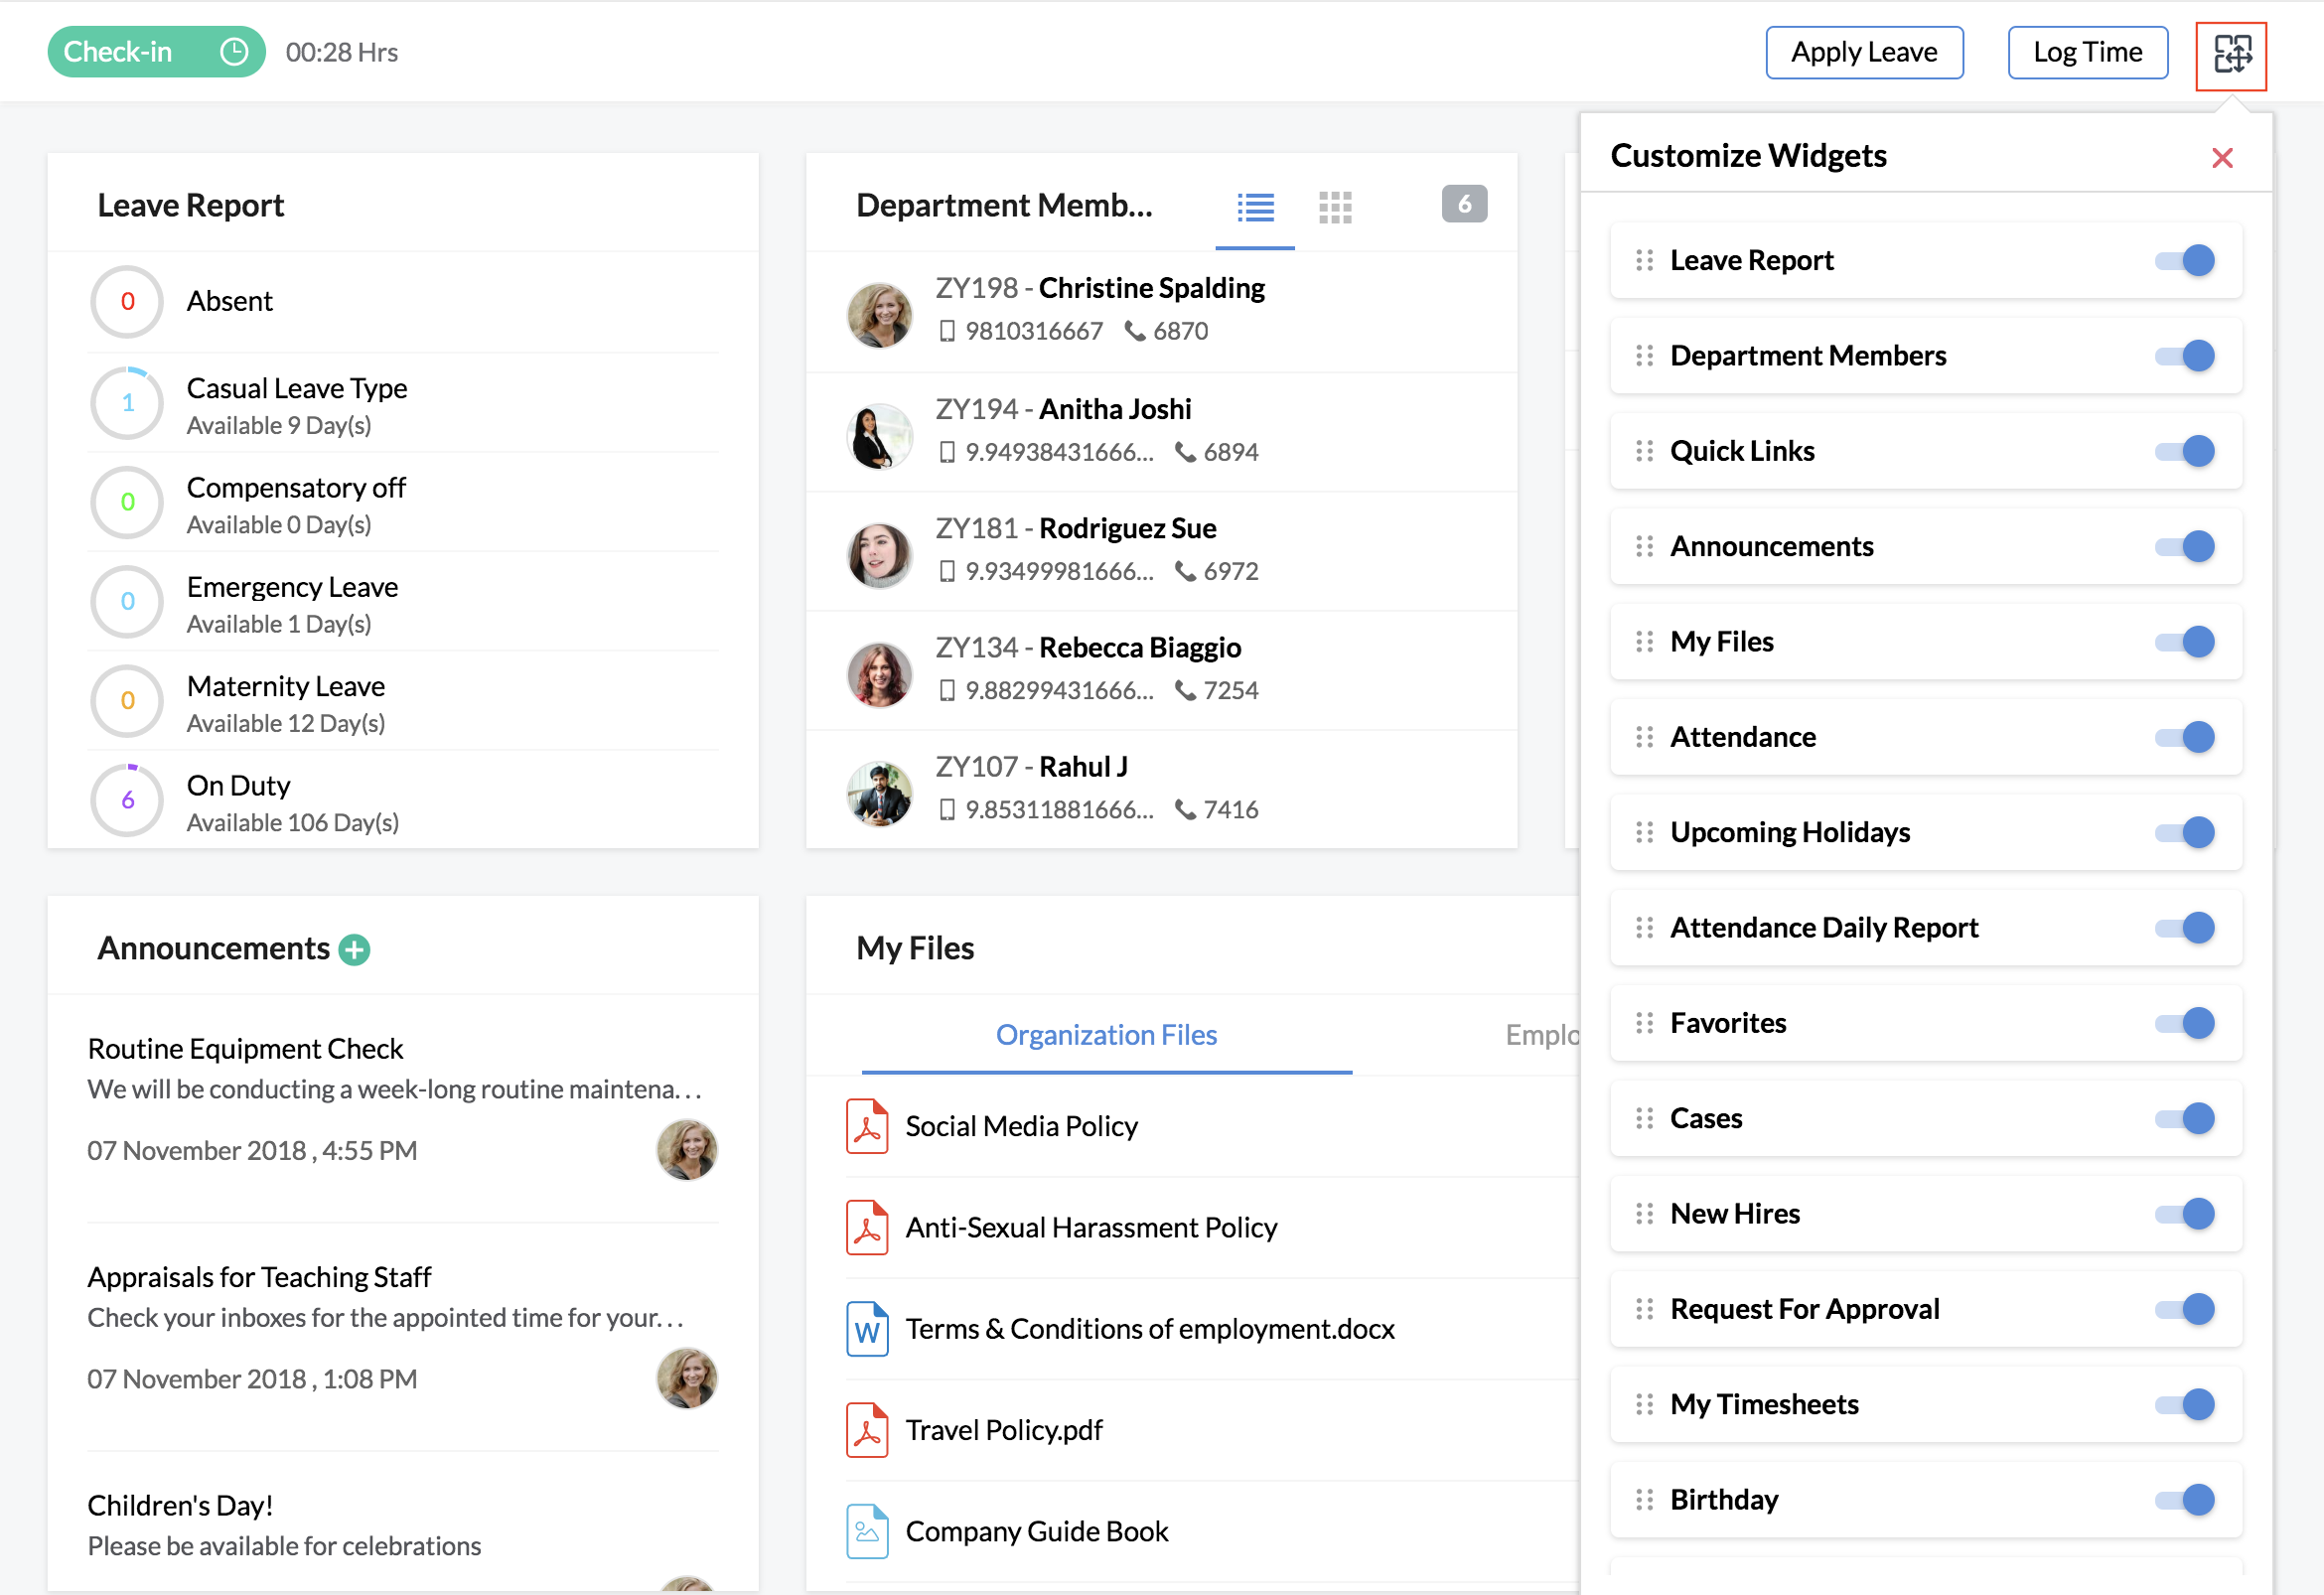 A sample layout of the employee dashboard